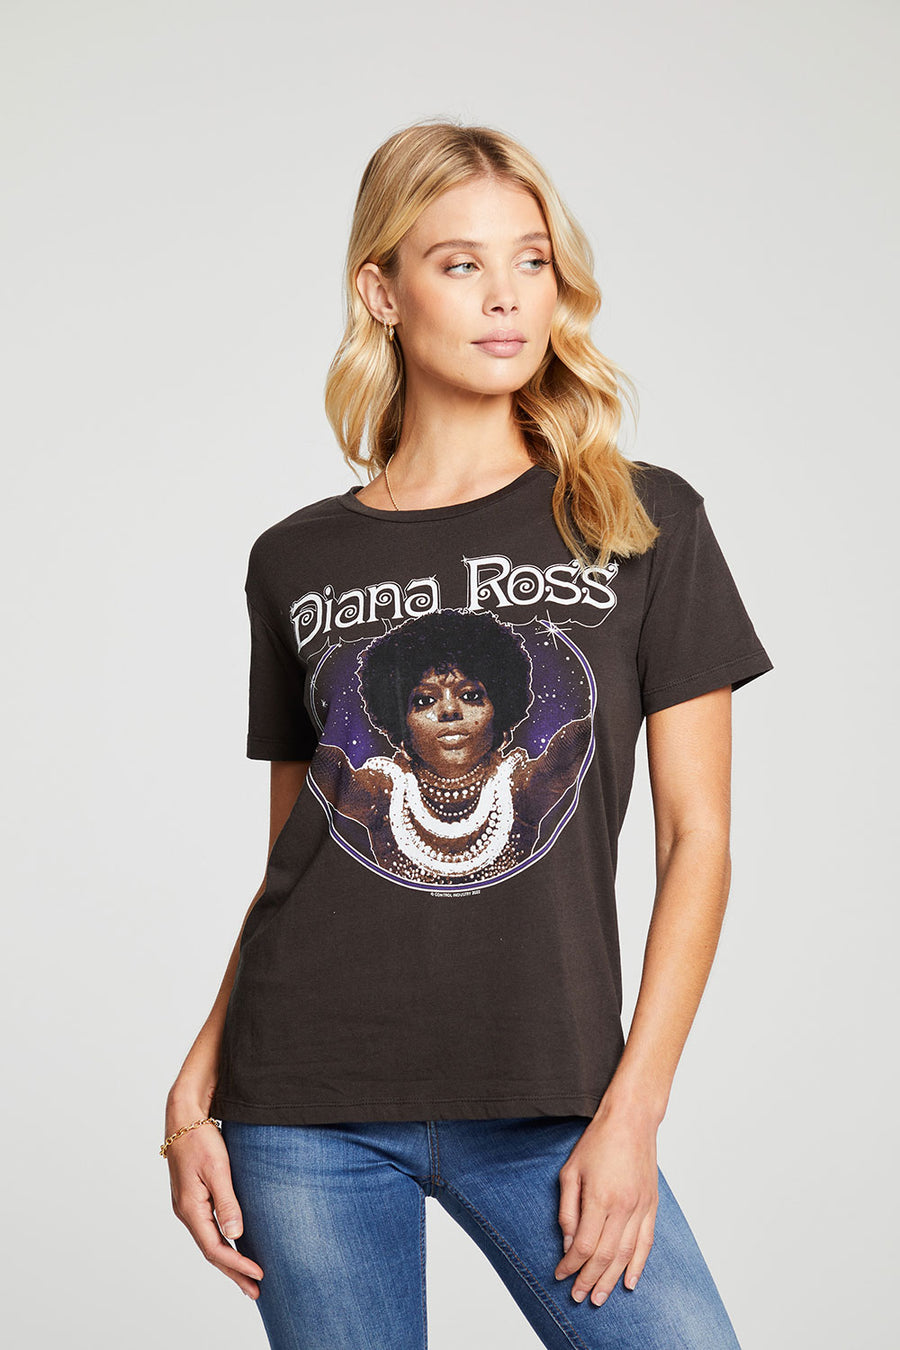 Diana Ross Crystal Ball WOMENS chaserbrand